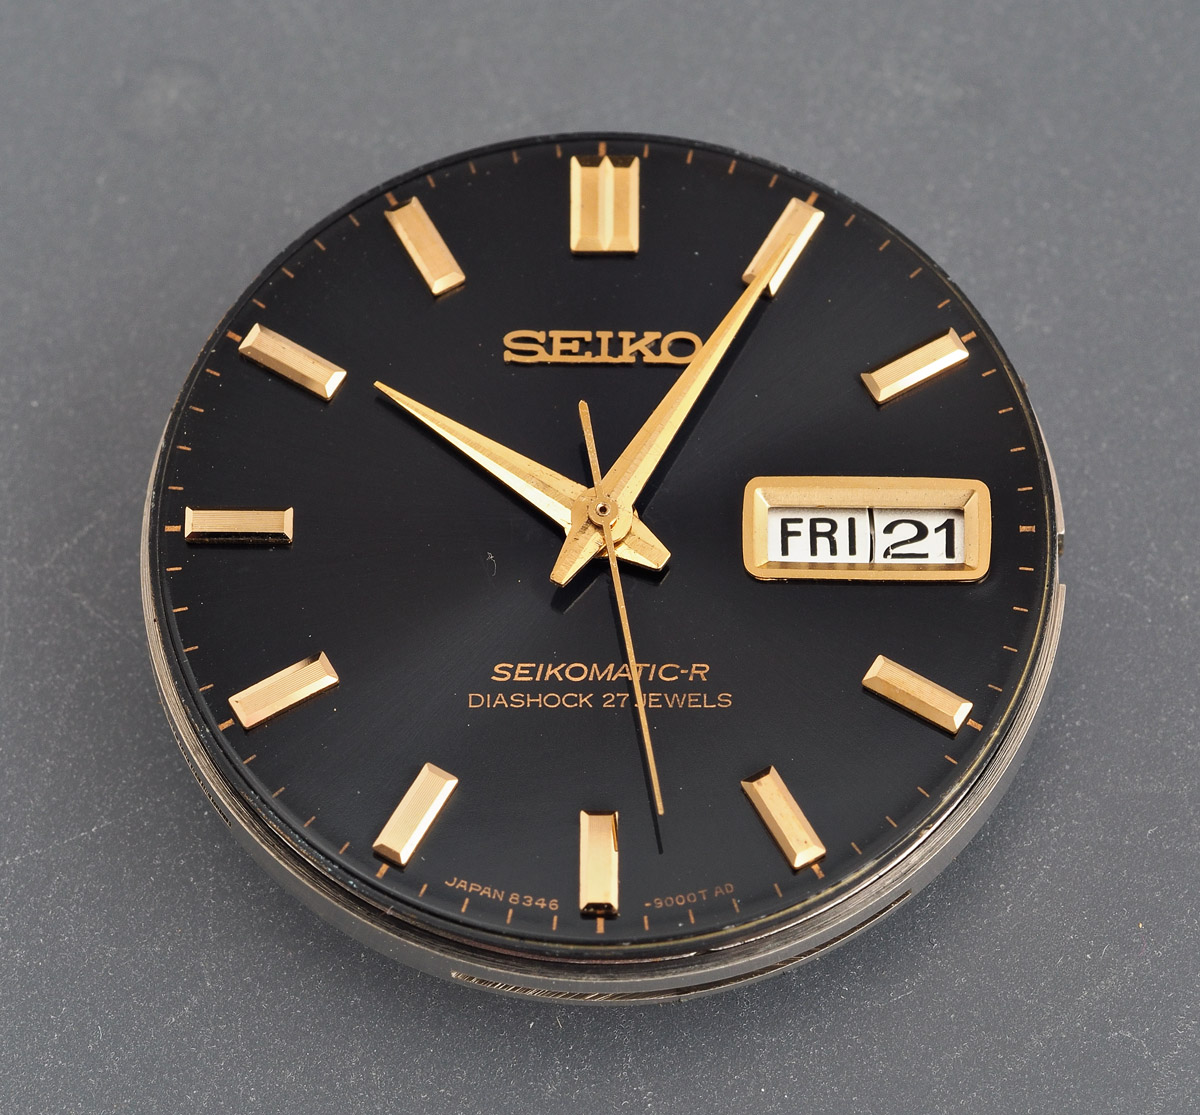 Splitting a pair of eights: Seikomatic-R/Business-A 8346-9000 Part 1 |  Adventures in Amateur Watch Fettling